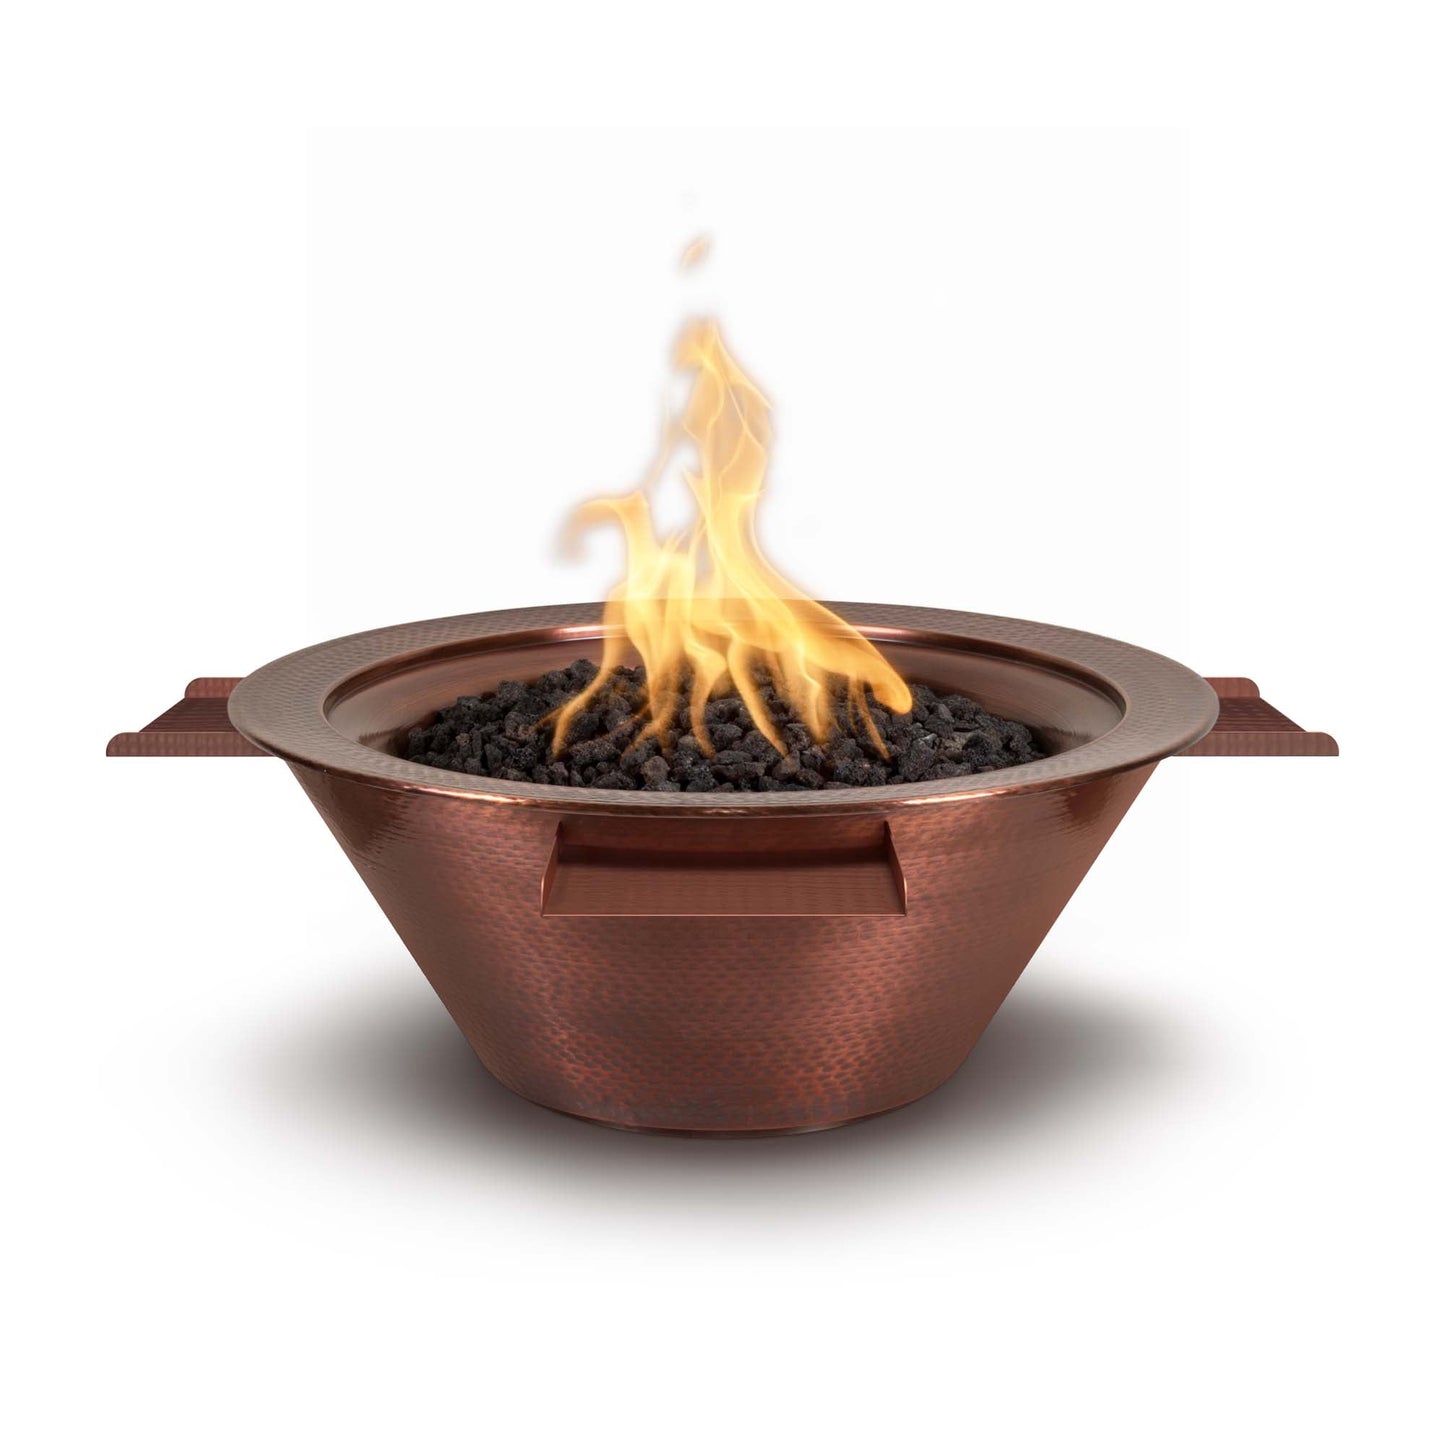 30" Cazo Hammered Copper 4-Way Water & Fire Bowl - Match Lit-Novel Home